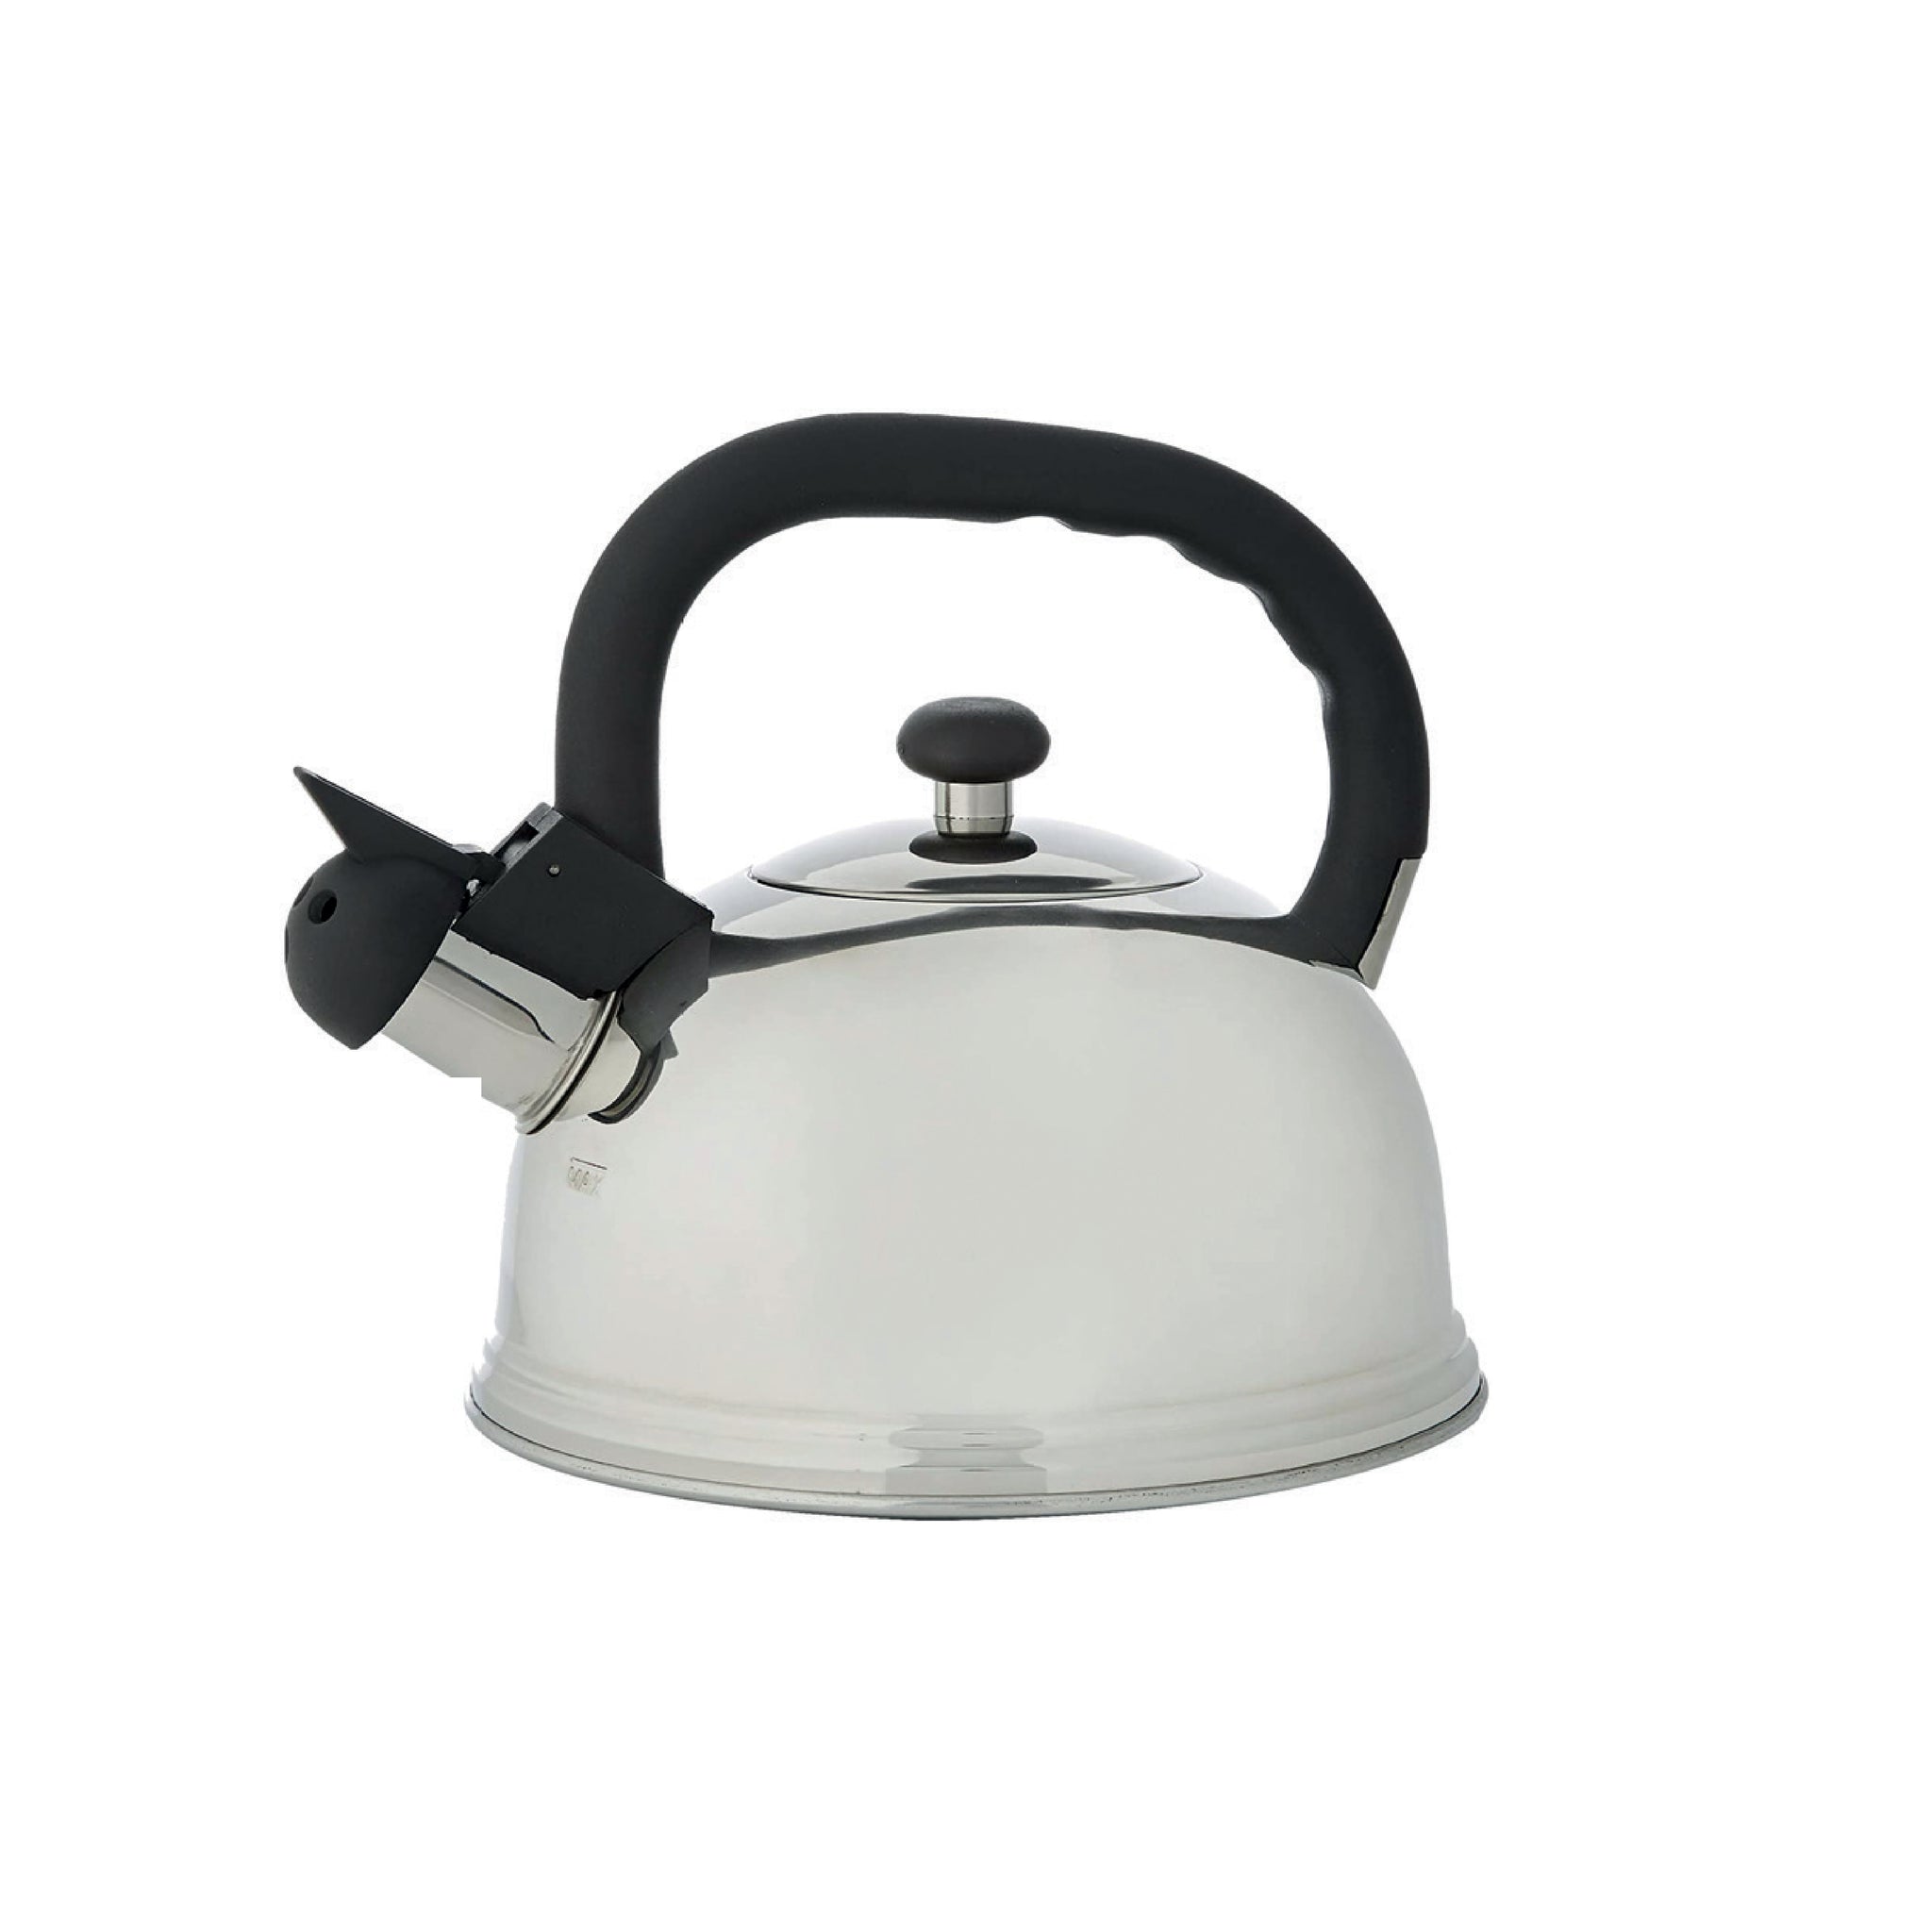 Le’Xpress S/Steel 1.6L Whistling Kettle